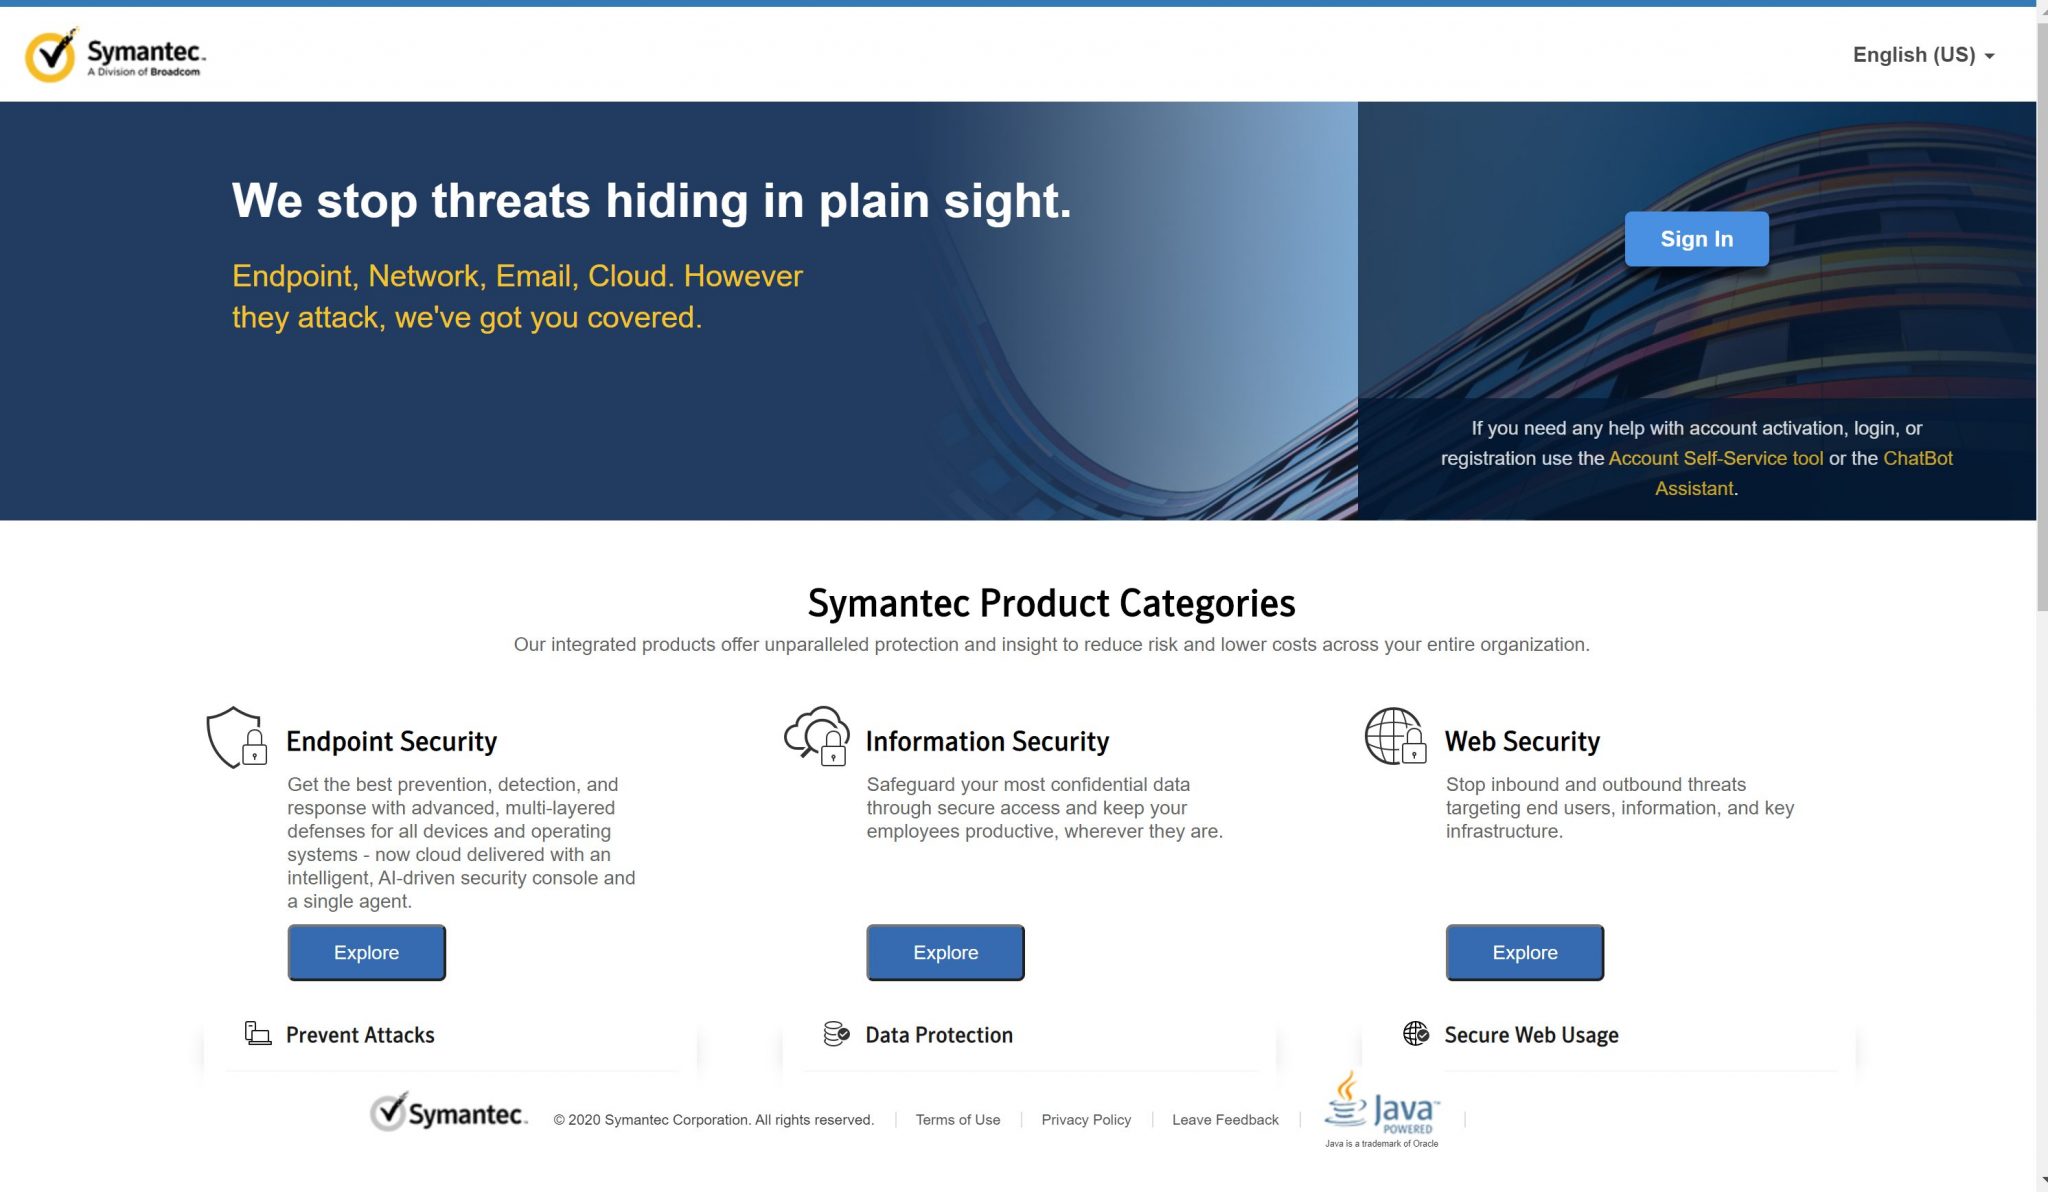 symantec endpoint protection cloud small business